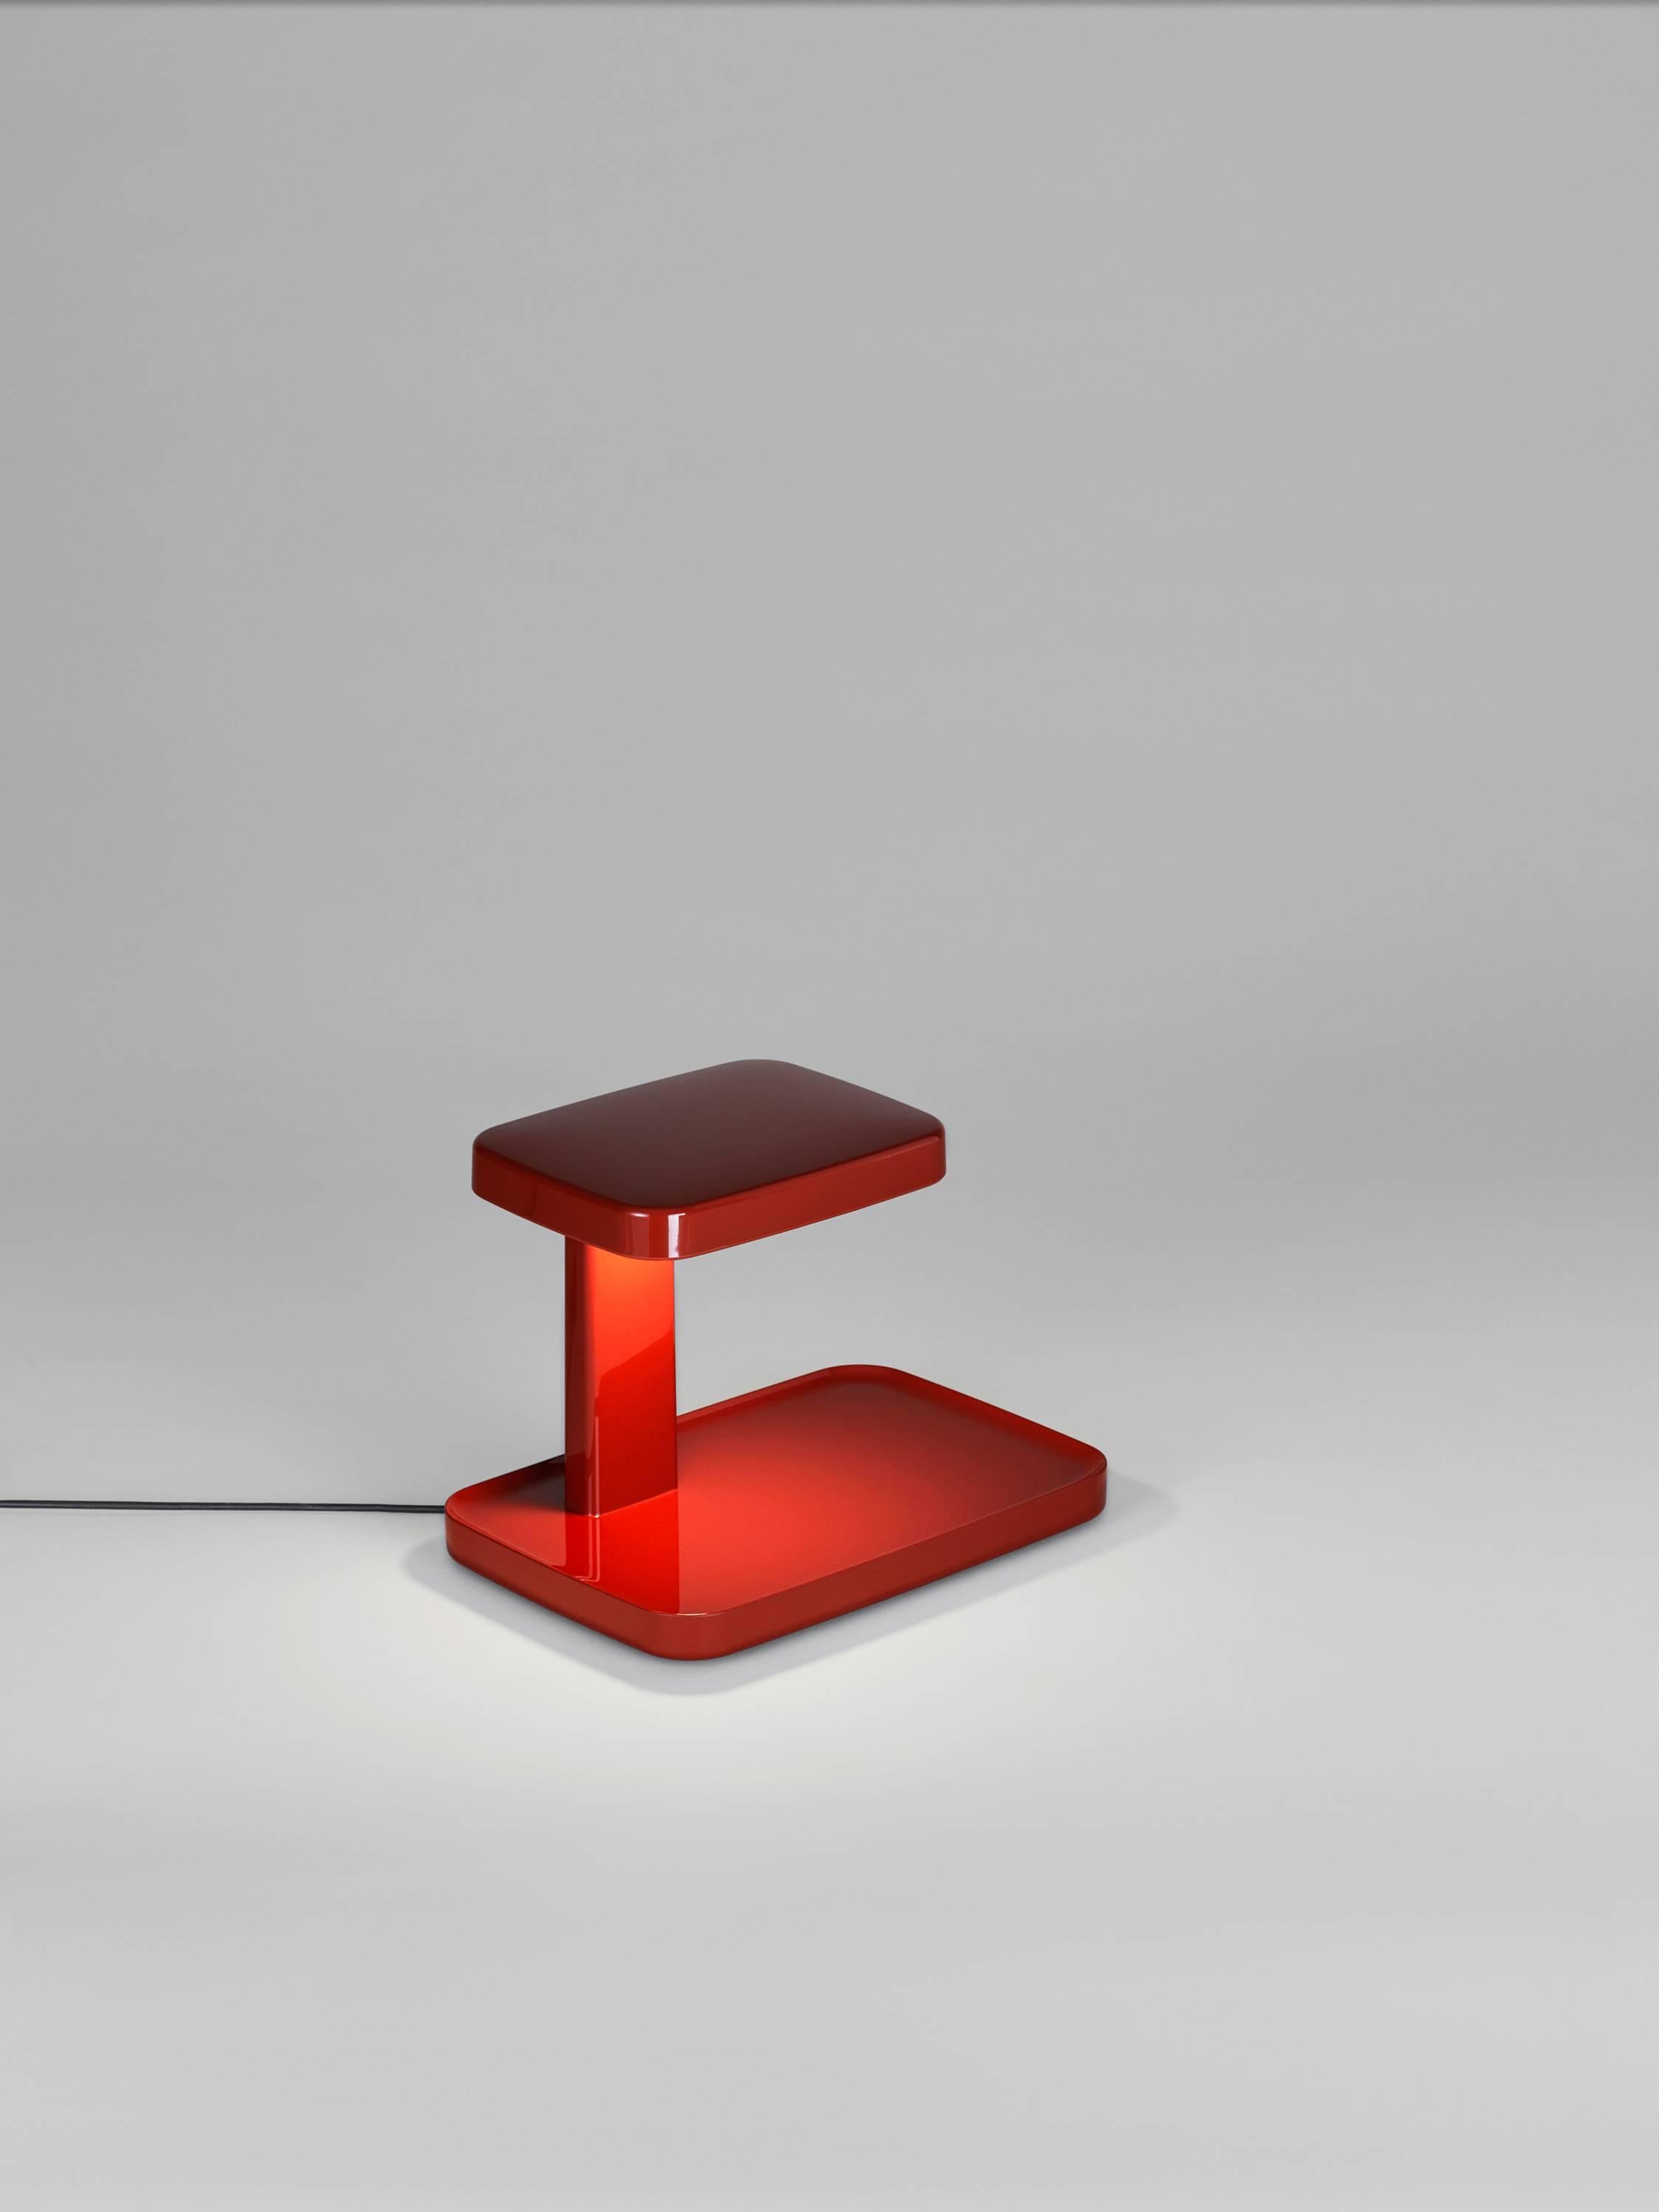 What will you shine the light on? Created by Ronan and Erwan Bouroullec, the flat base of the Piani takes the feel of a stage when a triangular beam of light—like a spotlight—shines on whatever is placed upon it.

The top of the lamp, like the